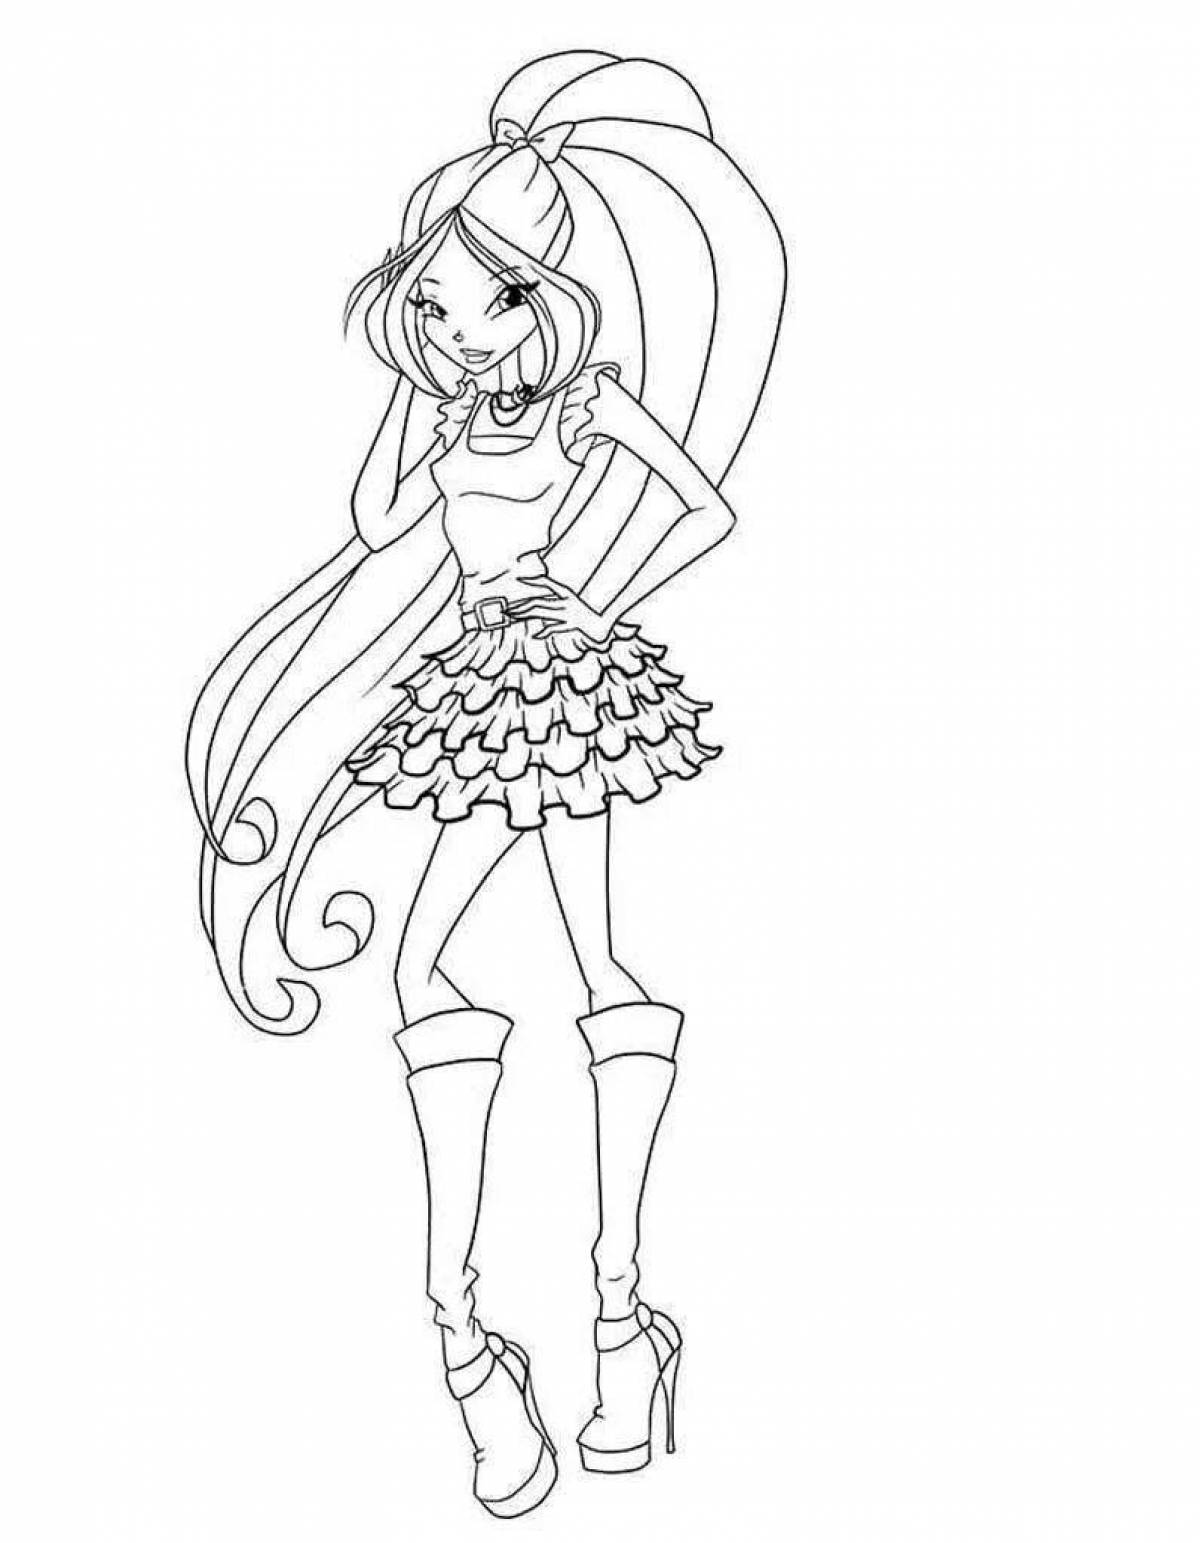 Charming winx coloring pictures